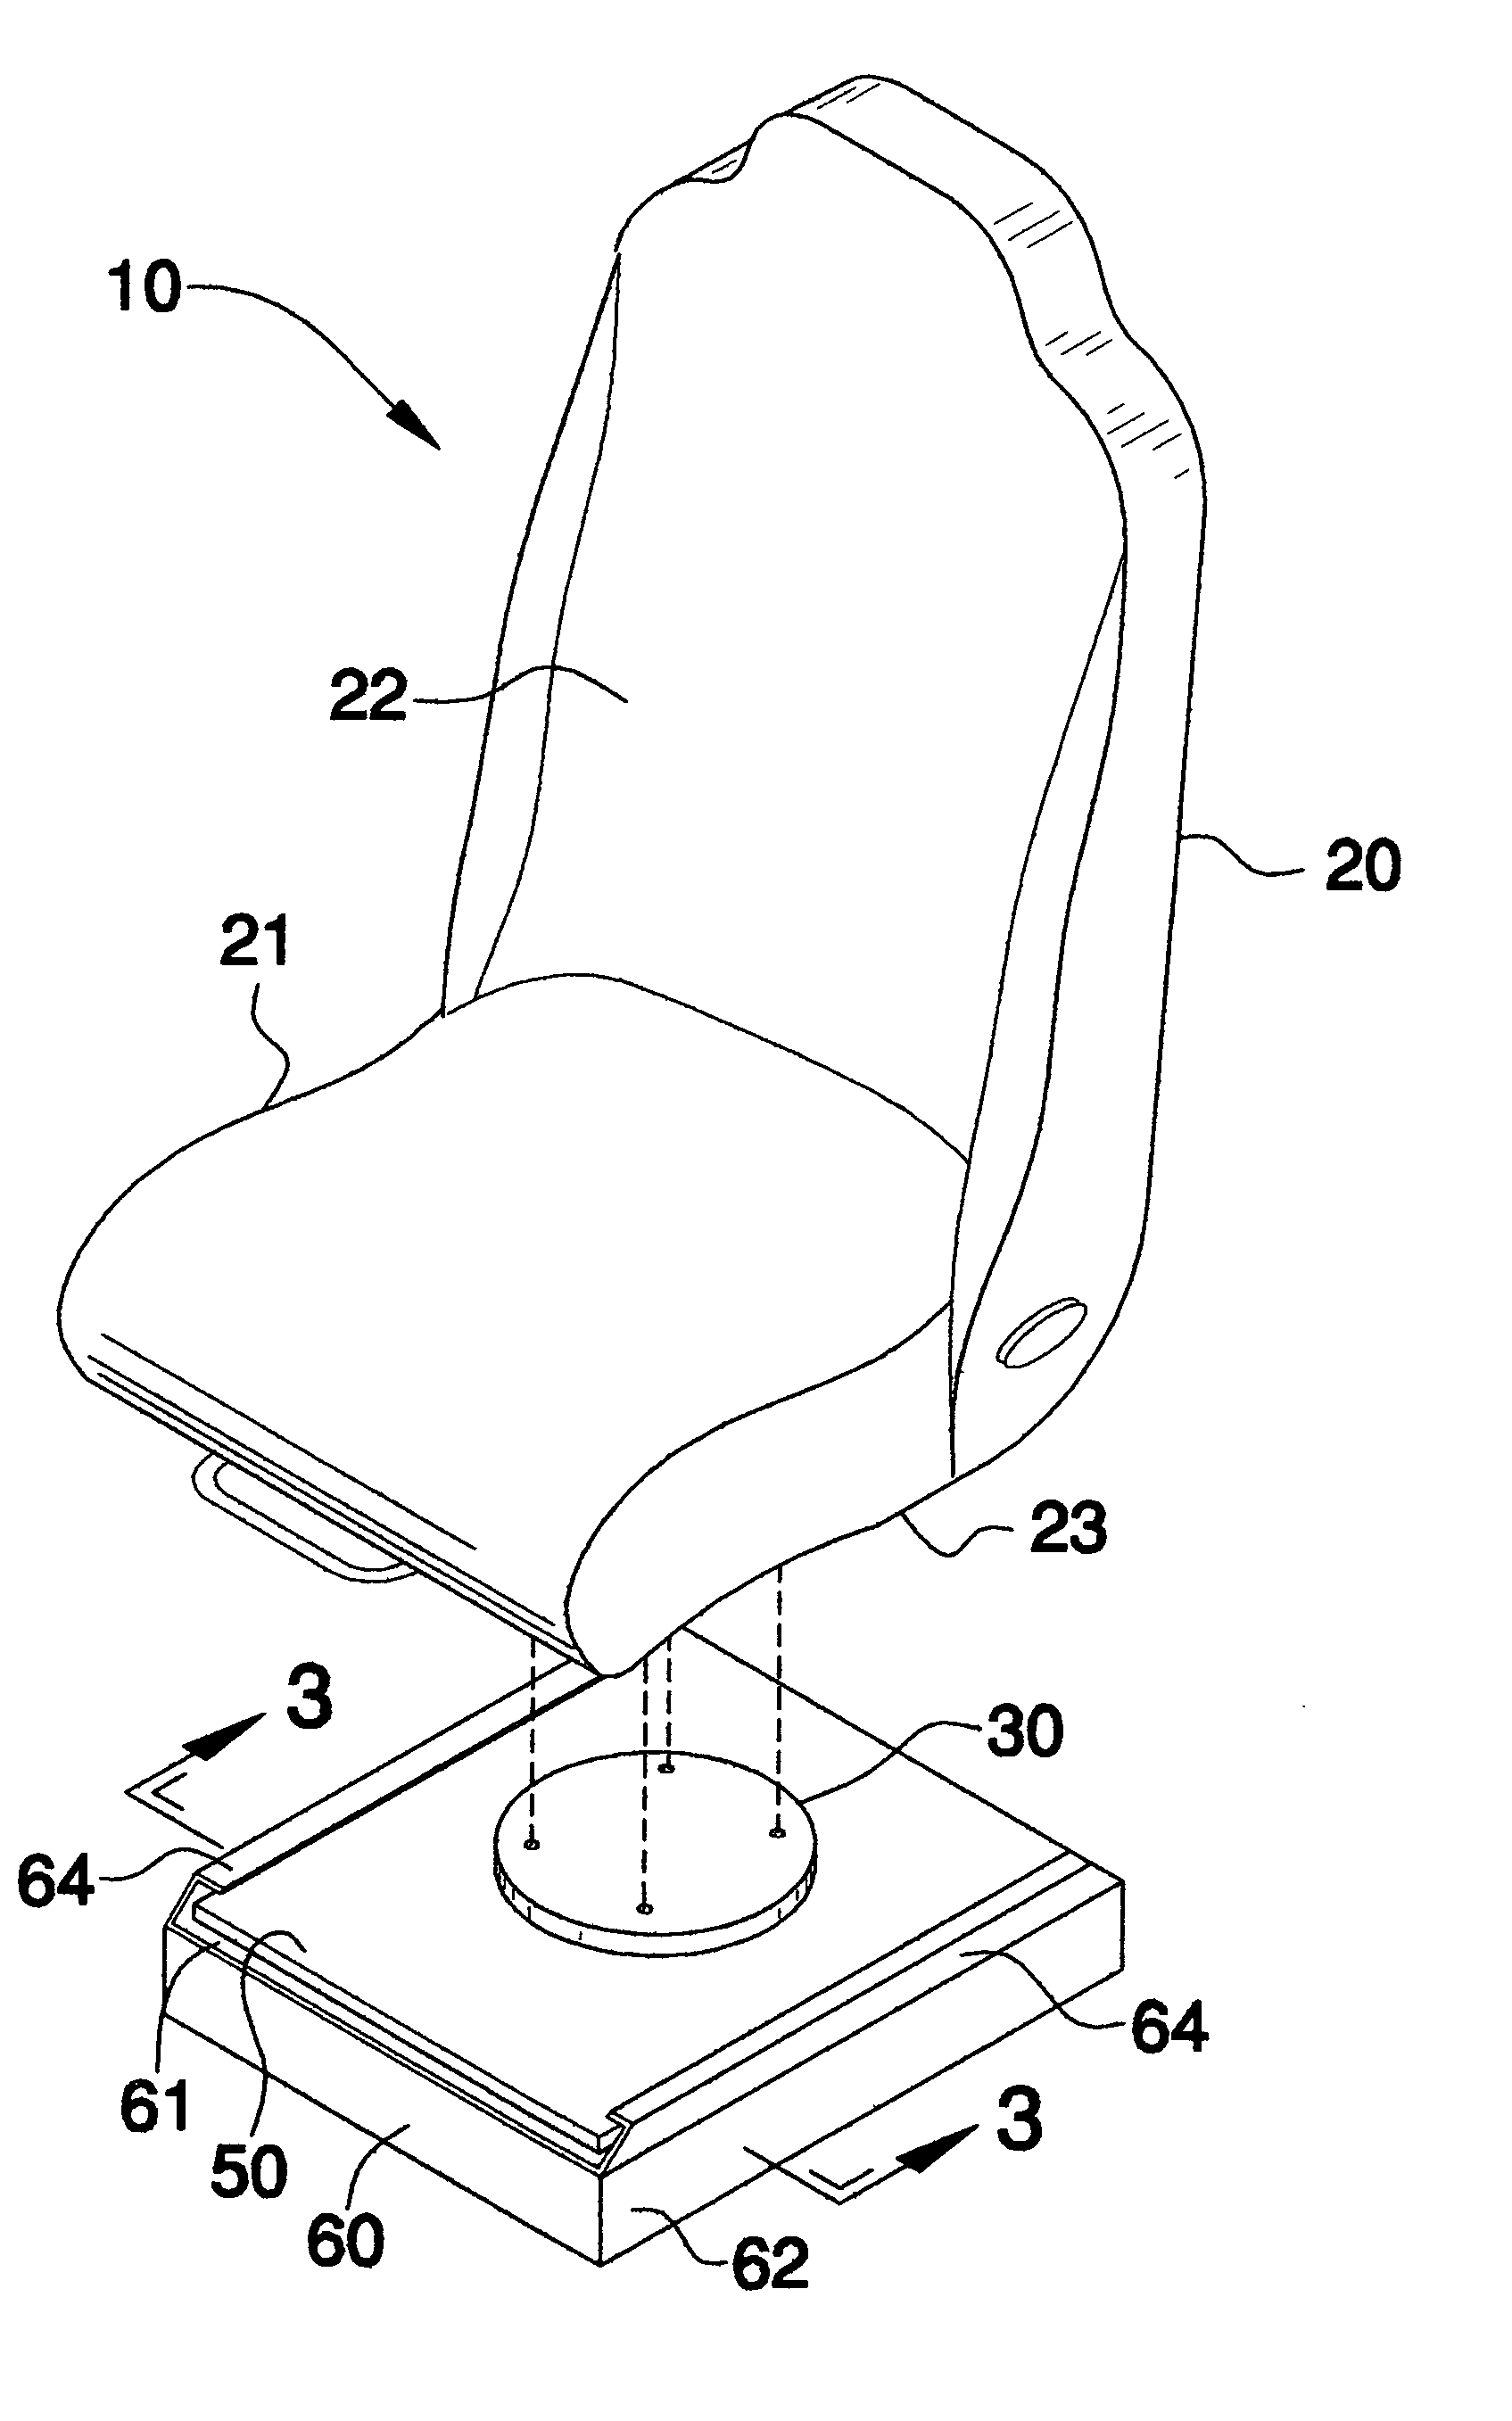 Power operable vehicle seat assembly